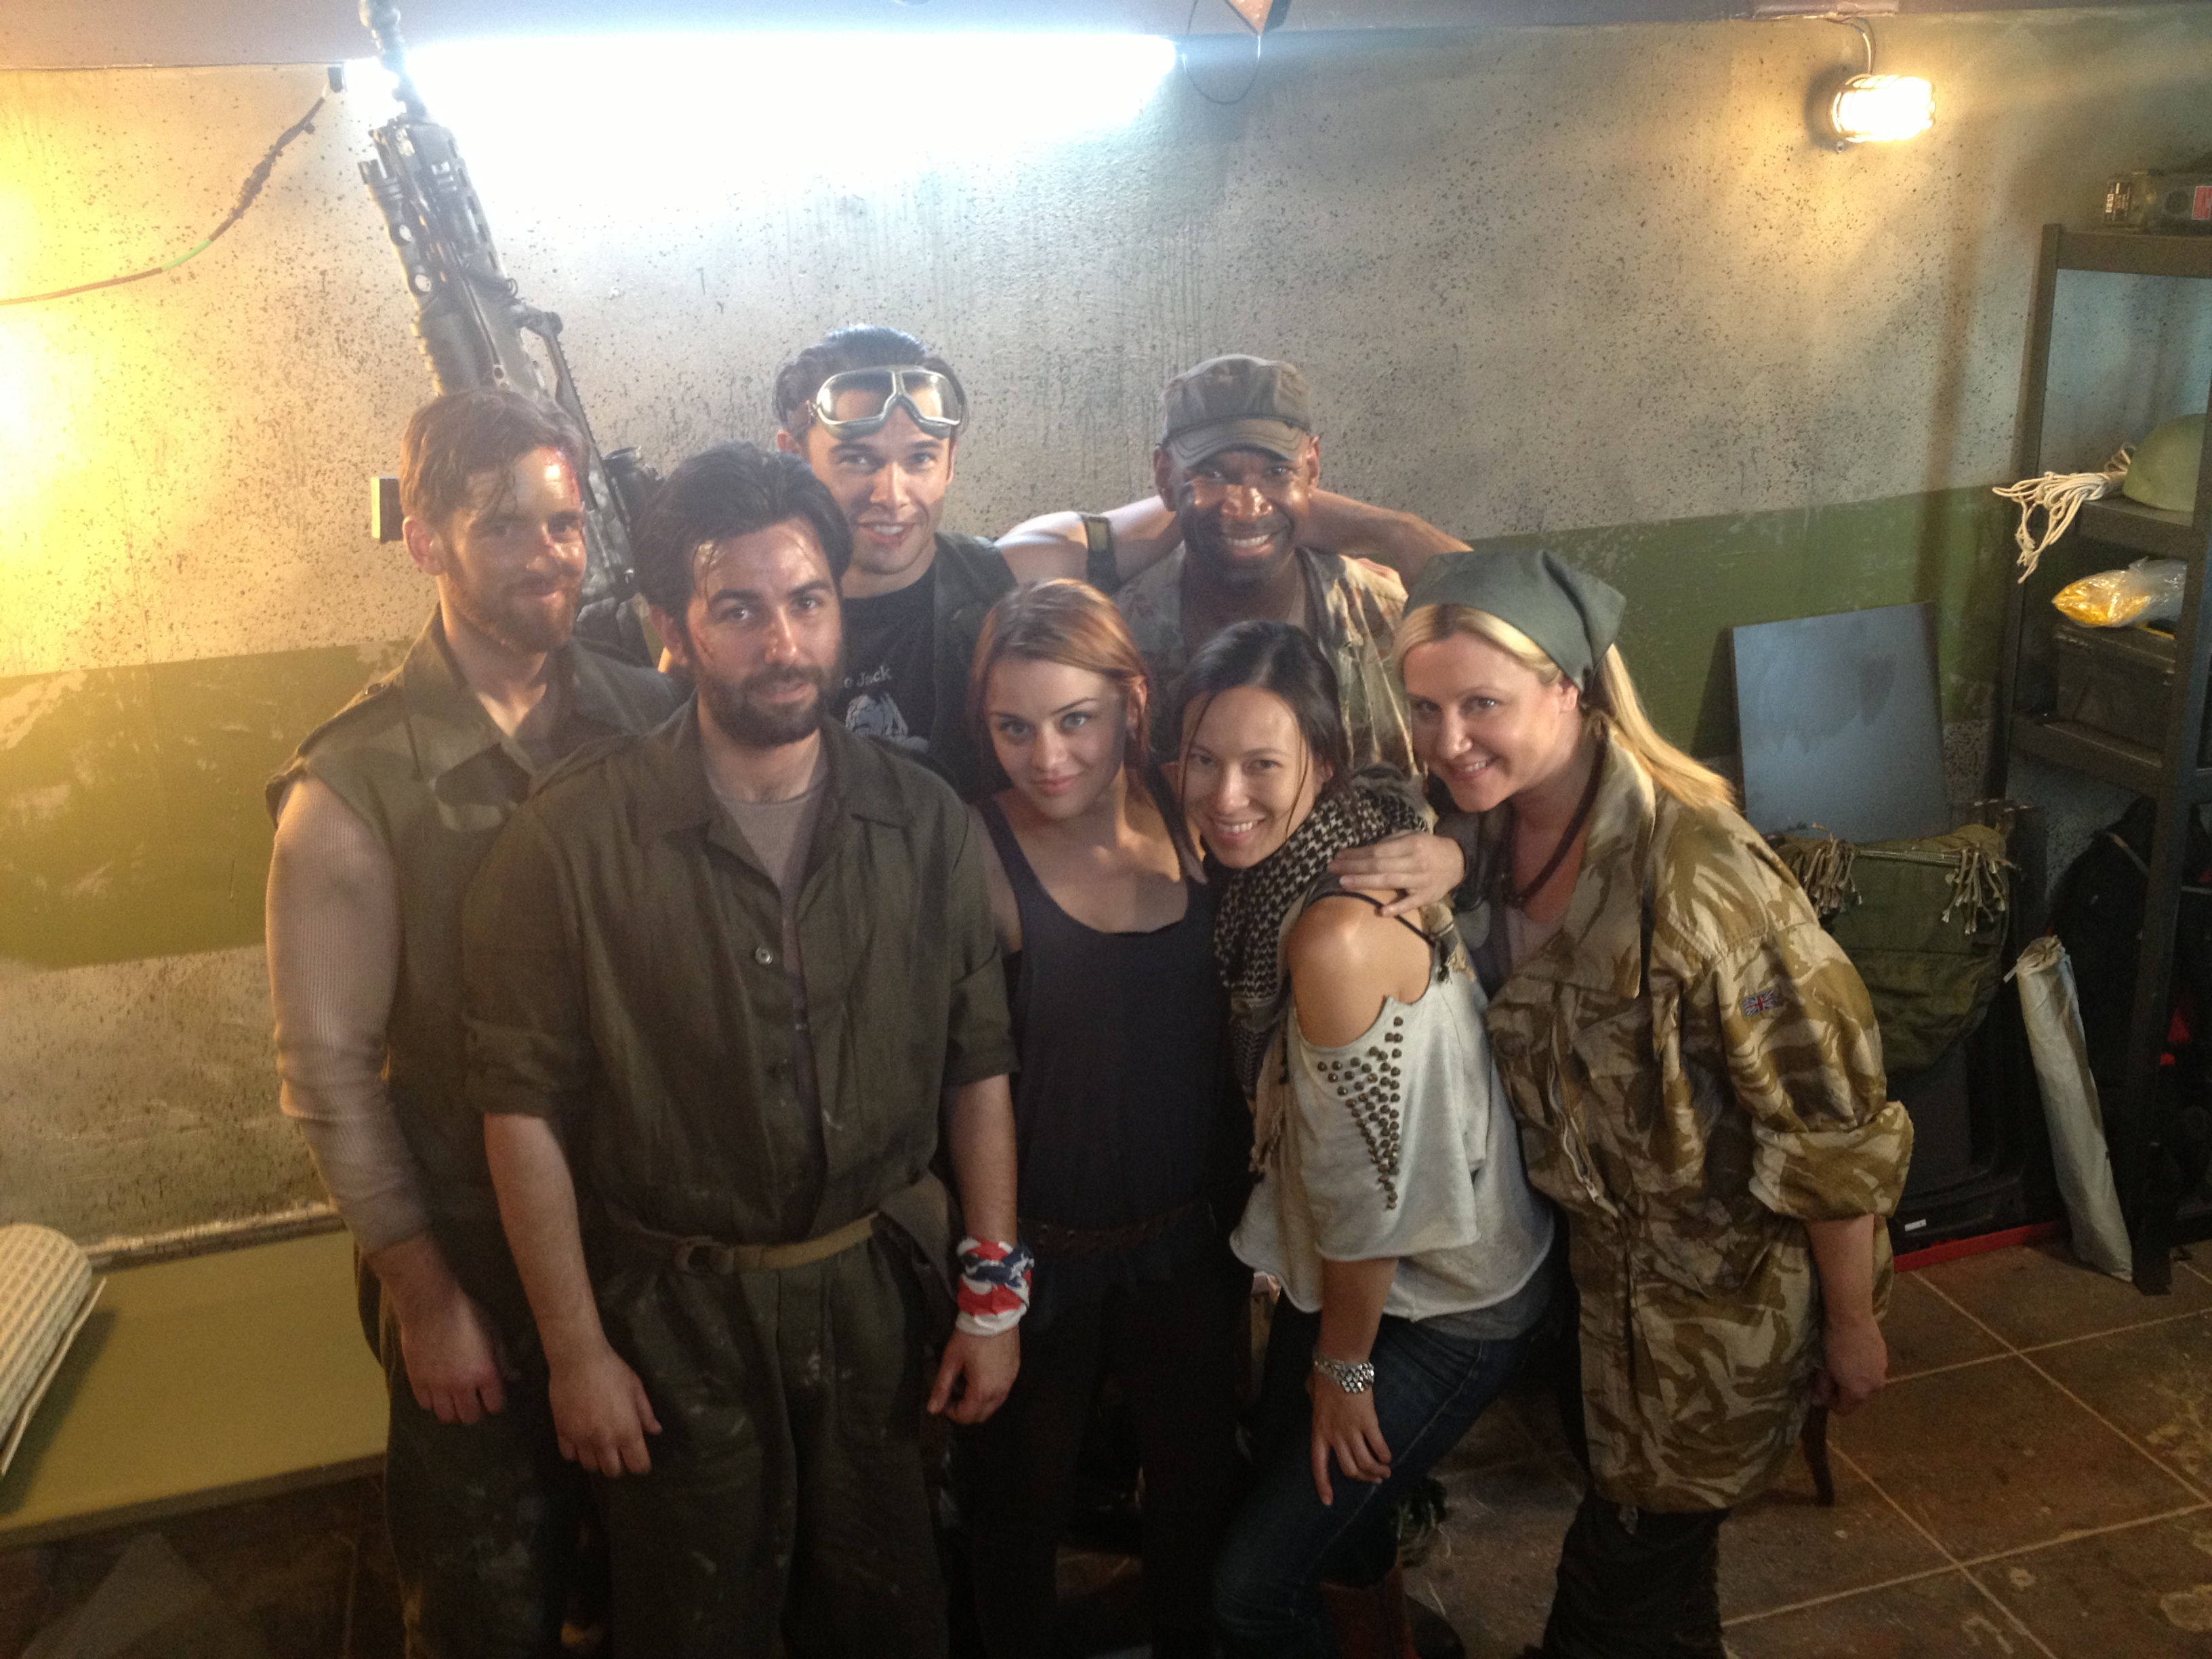 The amazing cast of Bunker